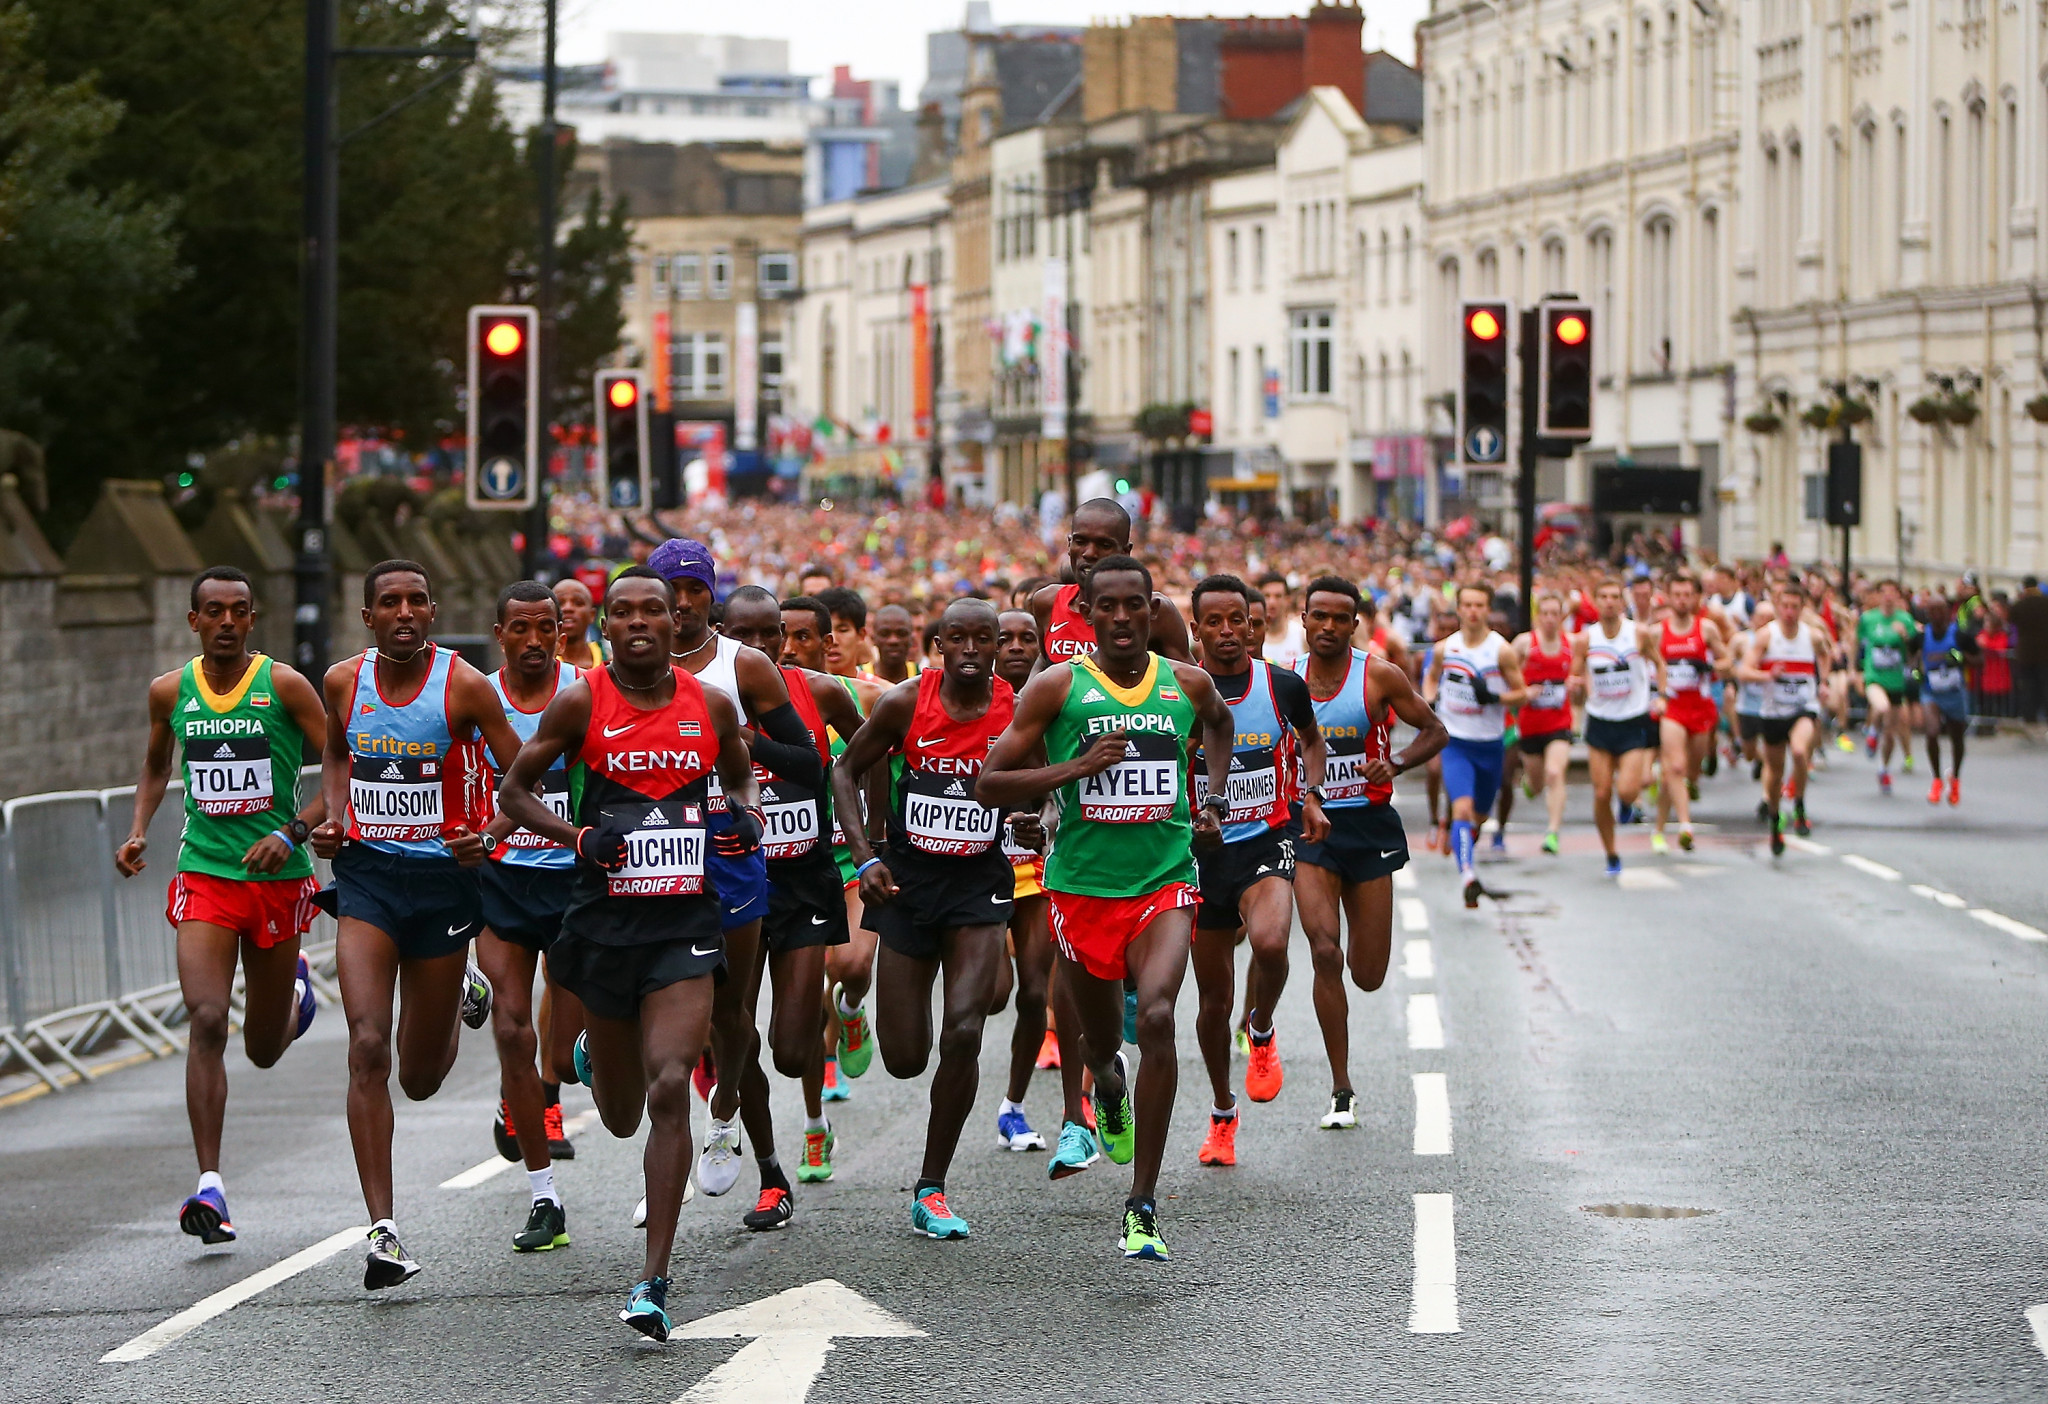 World Half Marathon organisers “accept the reality” by calling off mass